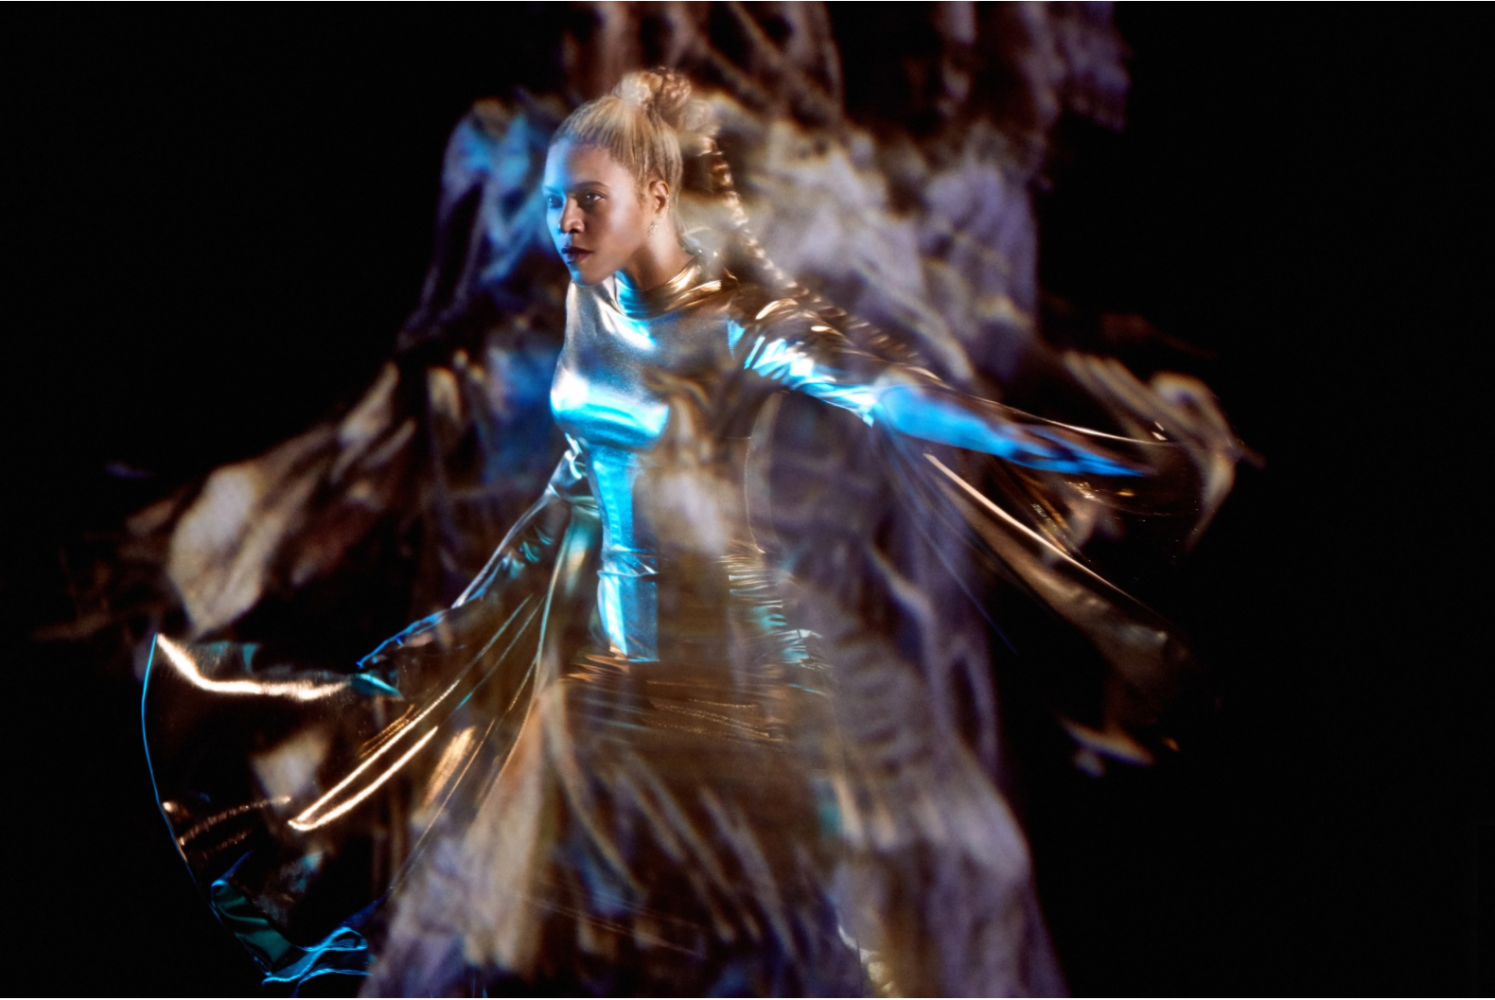 Holo-Gauze was instrumental in realising Beyoncé’s holographically-enhanced performance during this year’s Grammy Awards